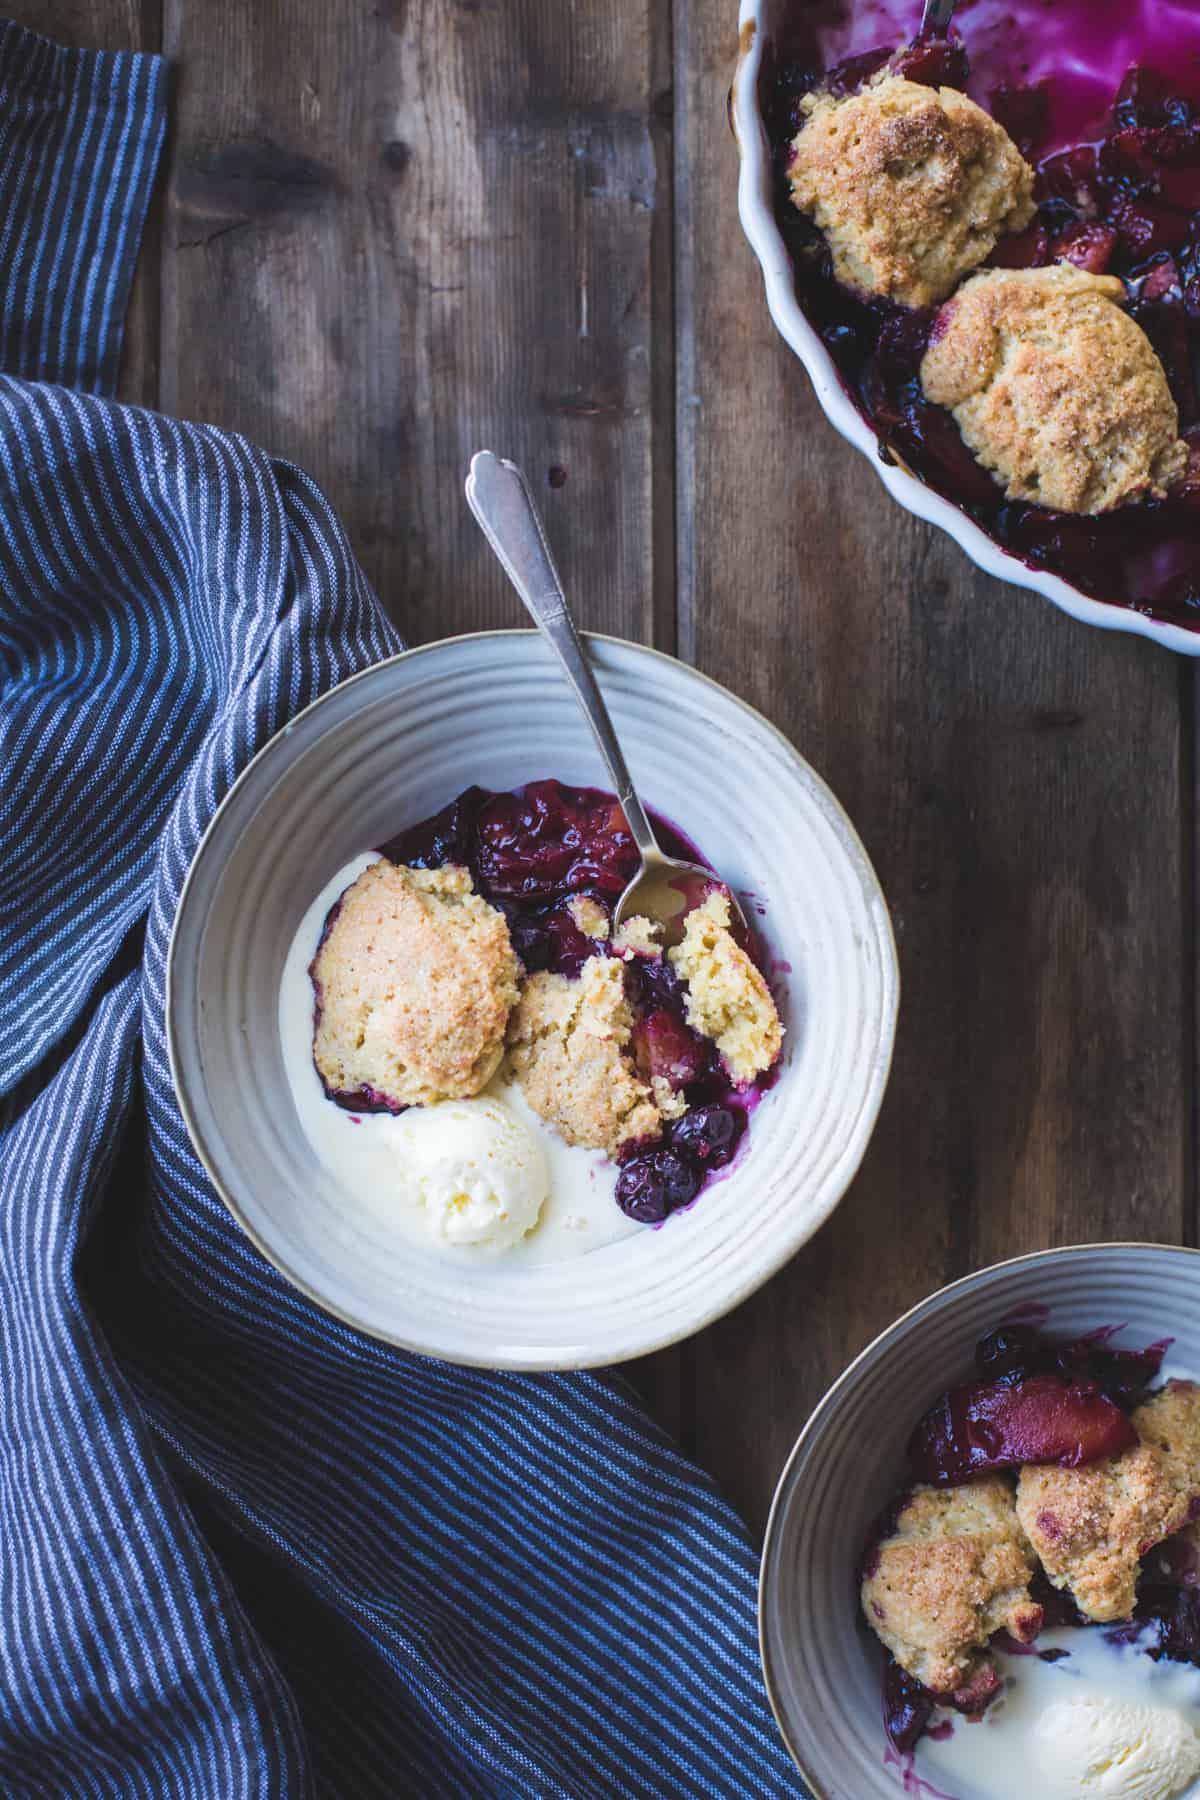 bowl of Gluten-Free Blueberry Plum Cobbler with Corn Flour Biscuits